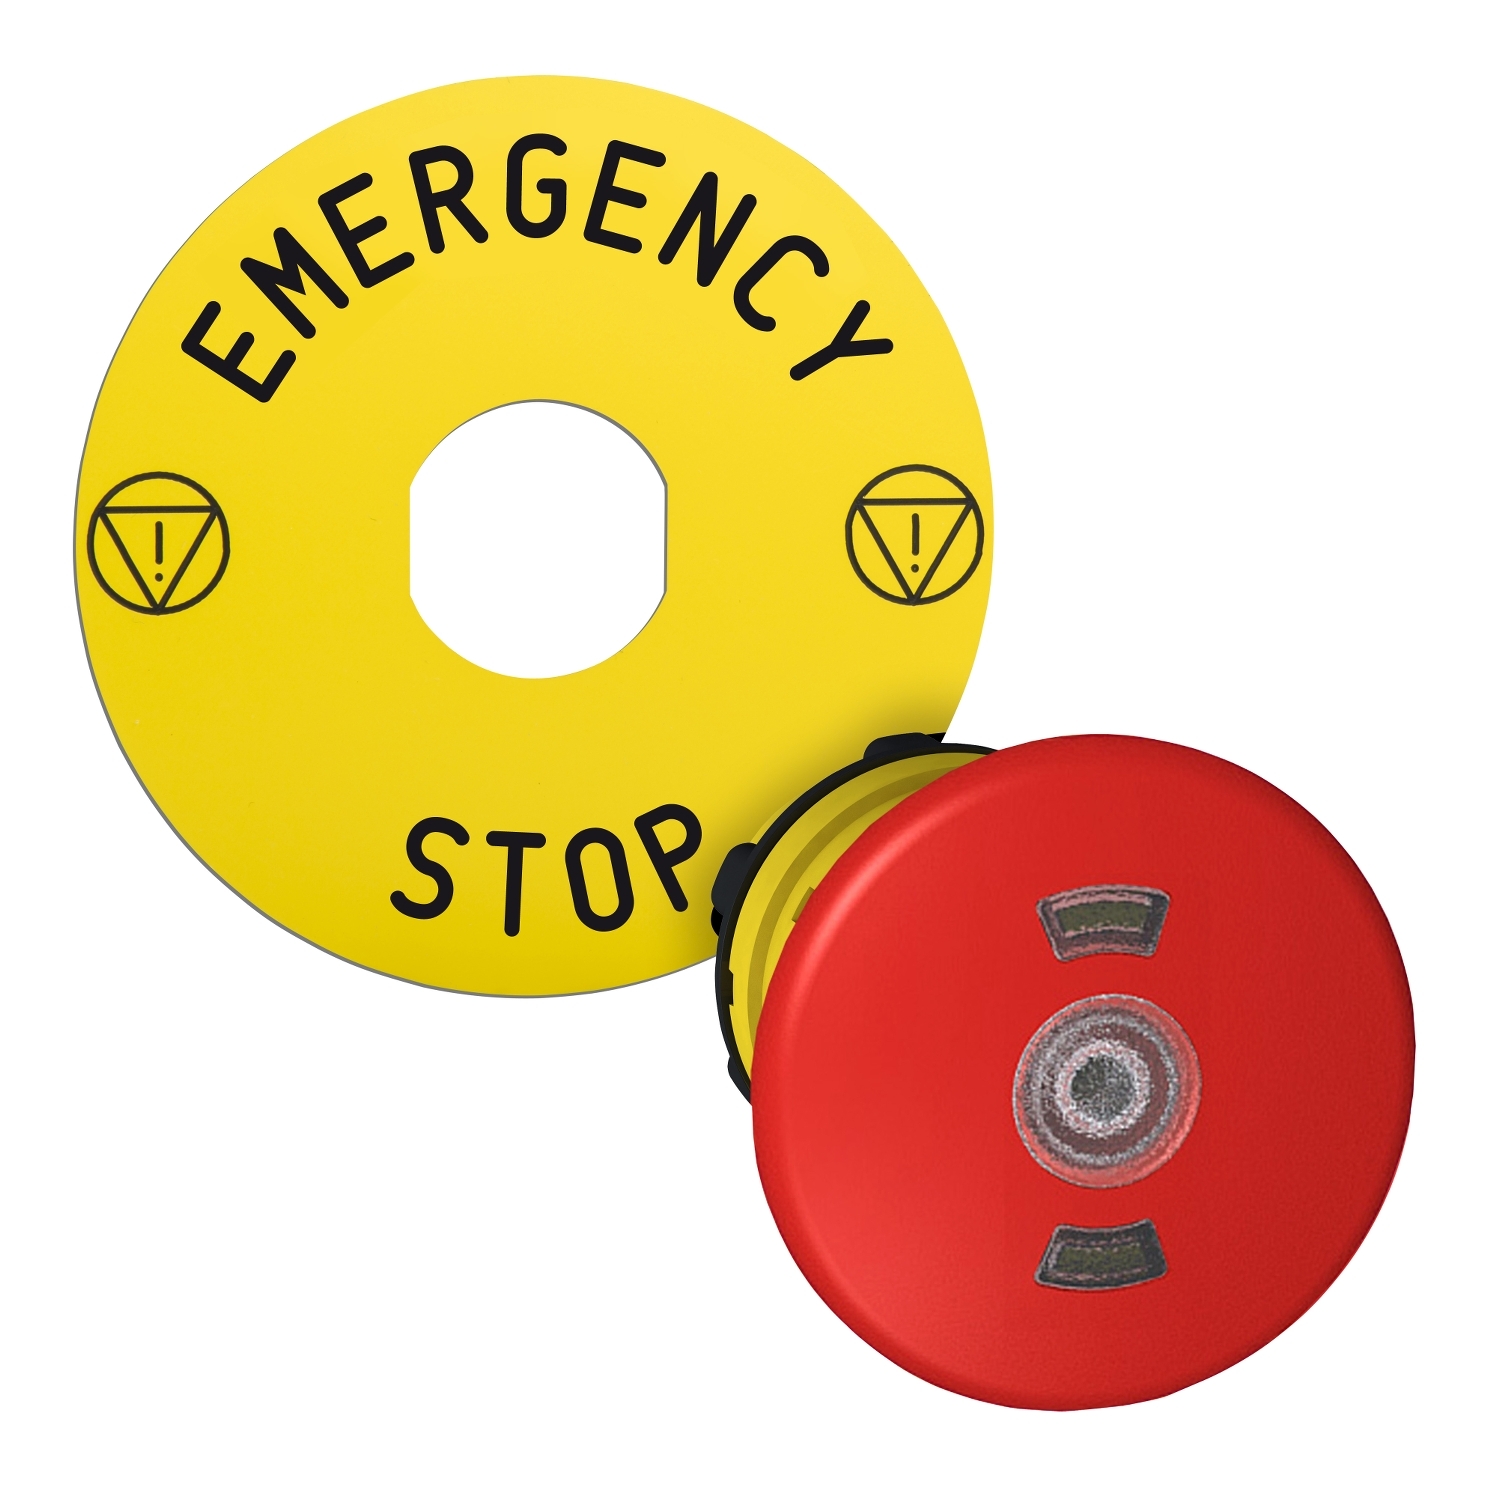 red Ø40 illum Emergency stop pushbutton head with yellow legend plate